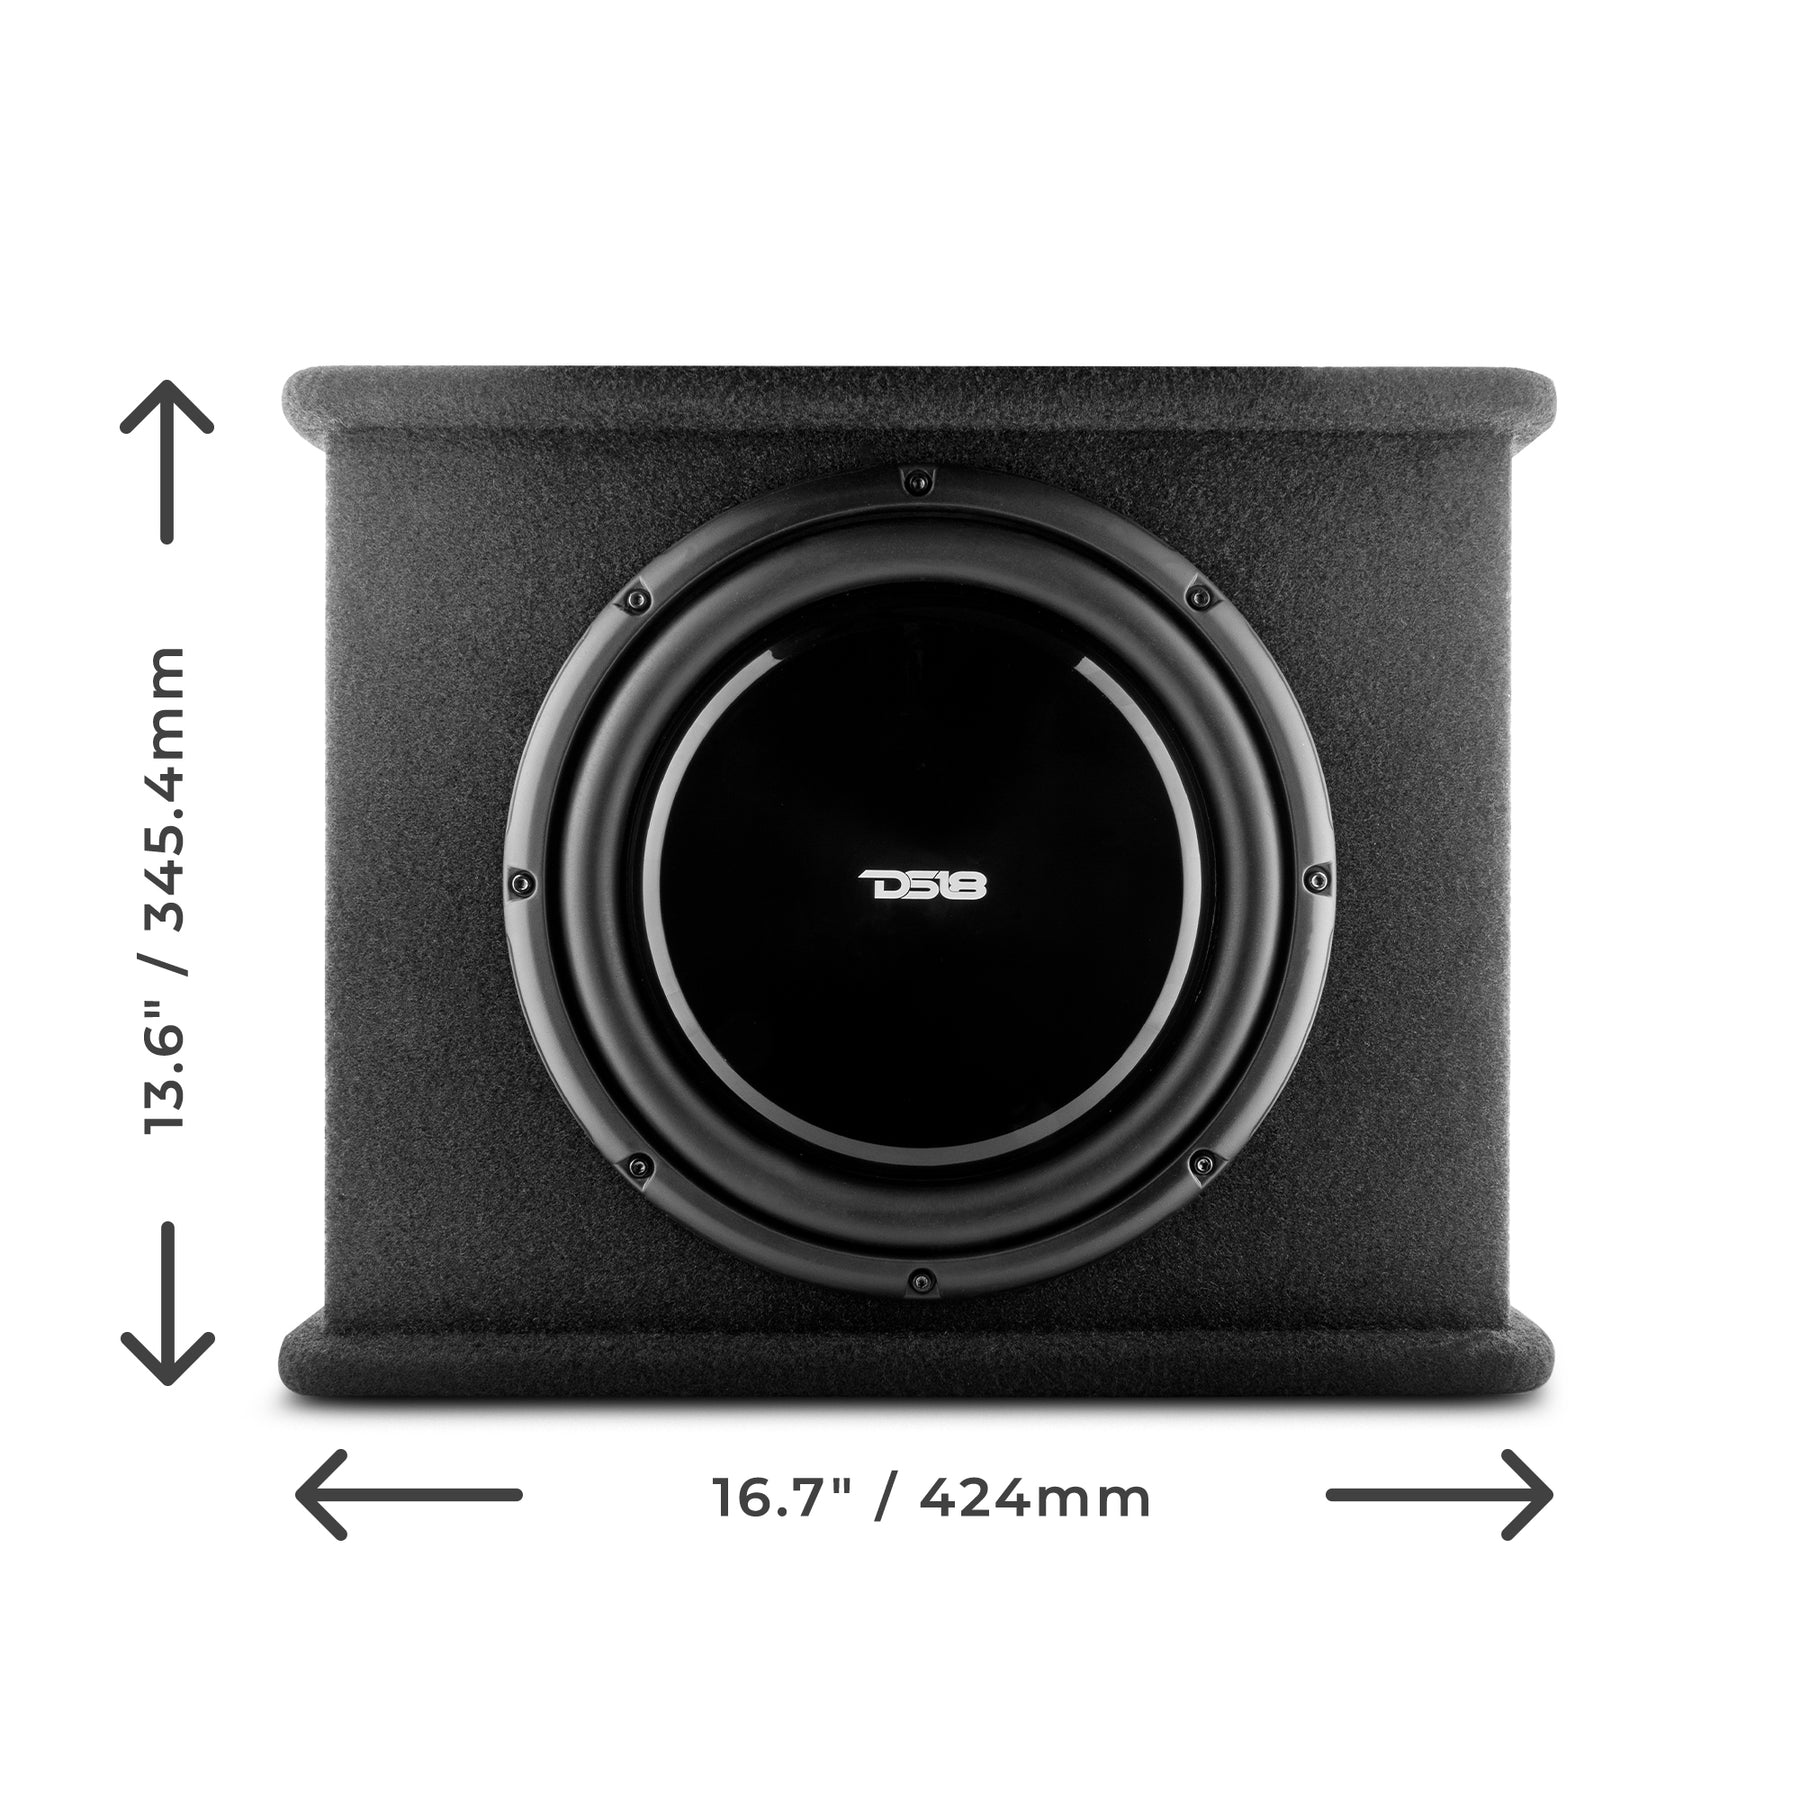 Pioneer launches a powerful, space-saving subwoofer perfect for